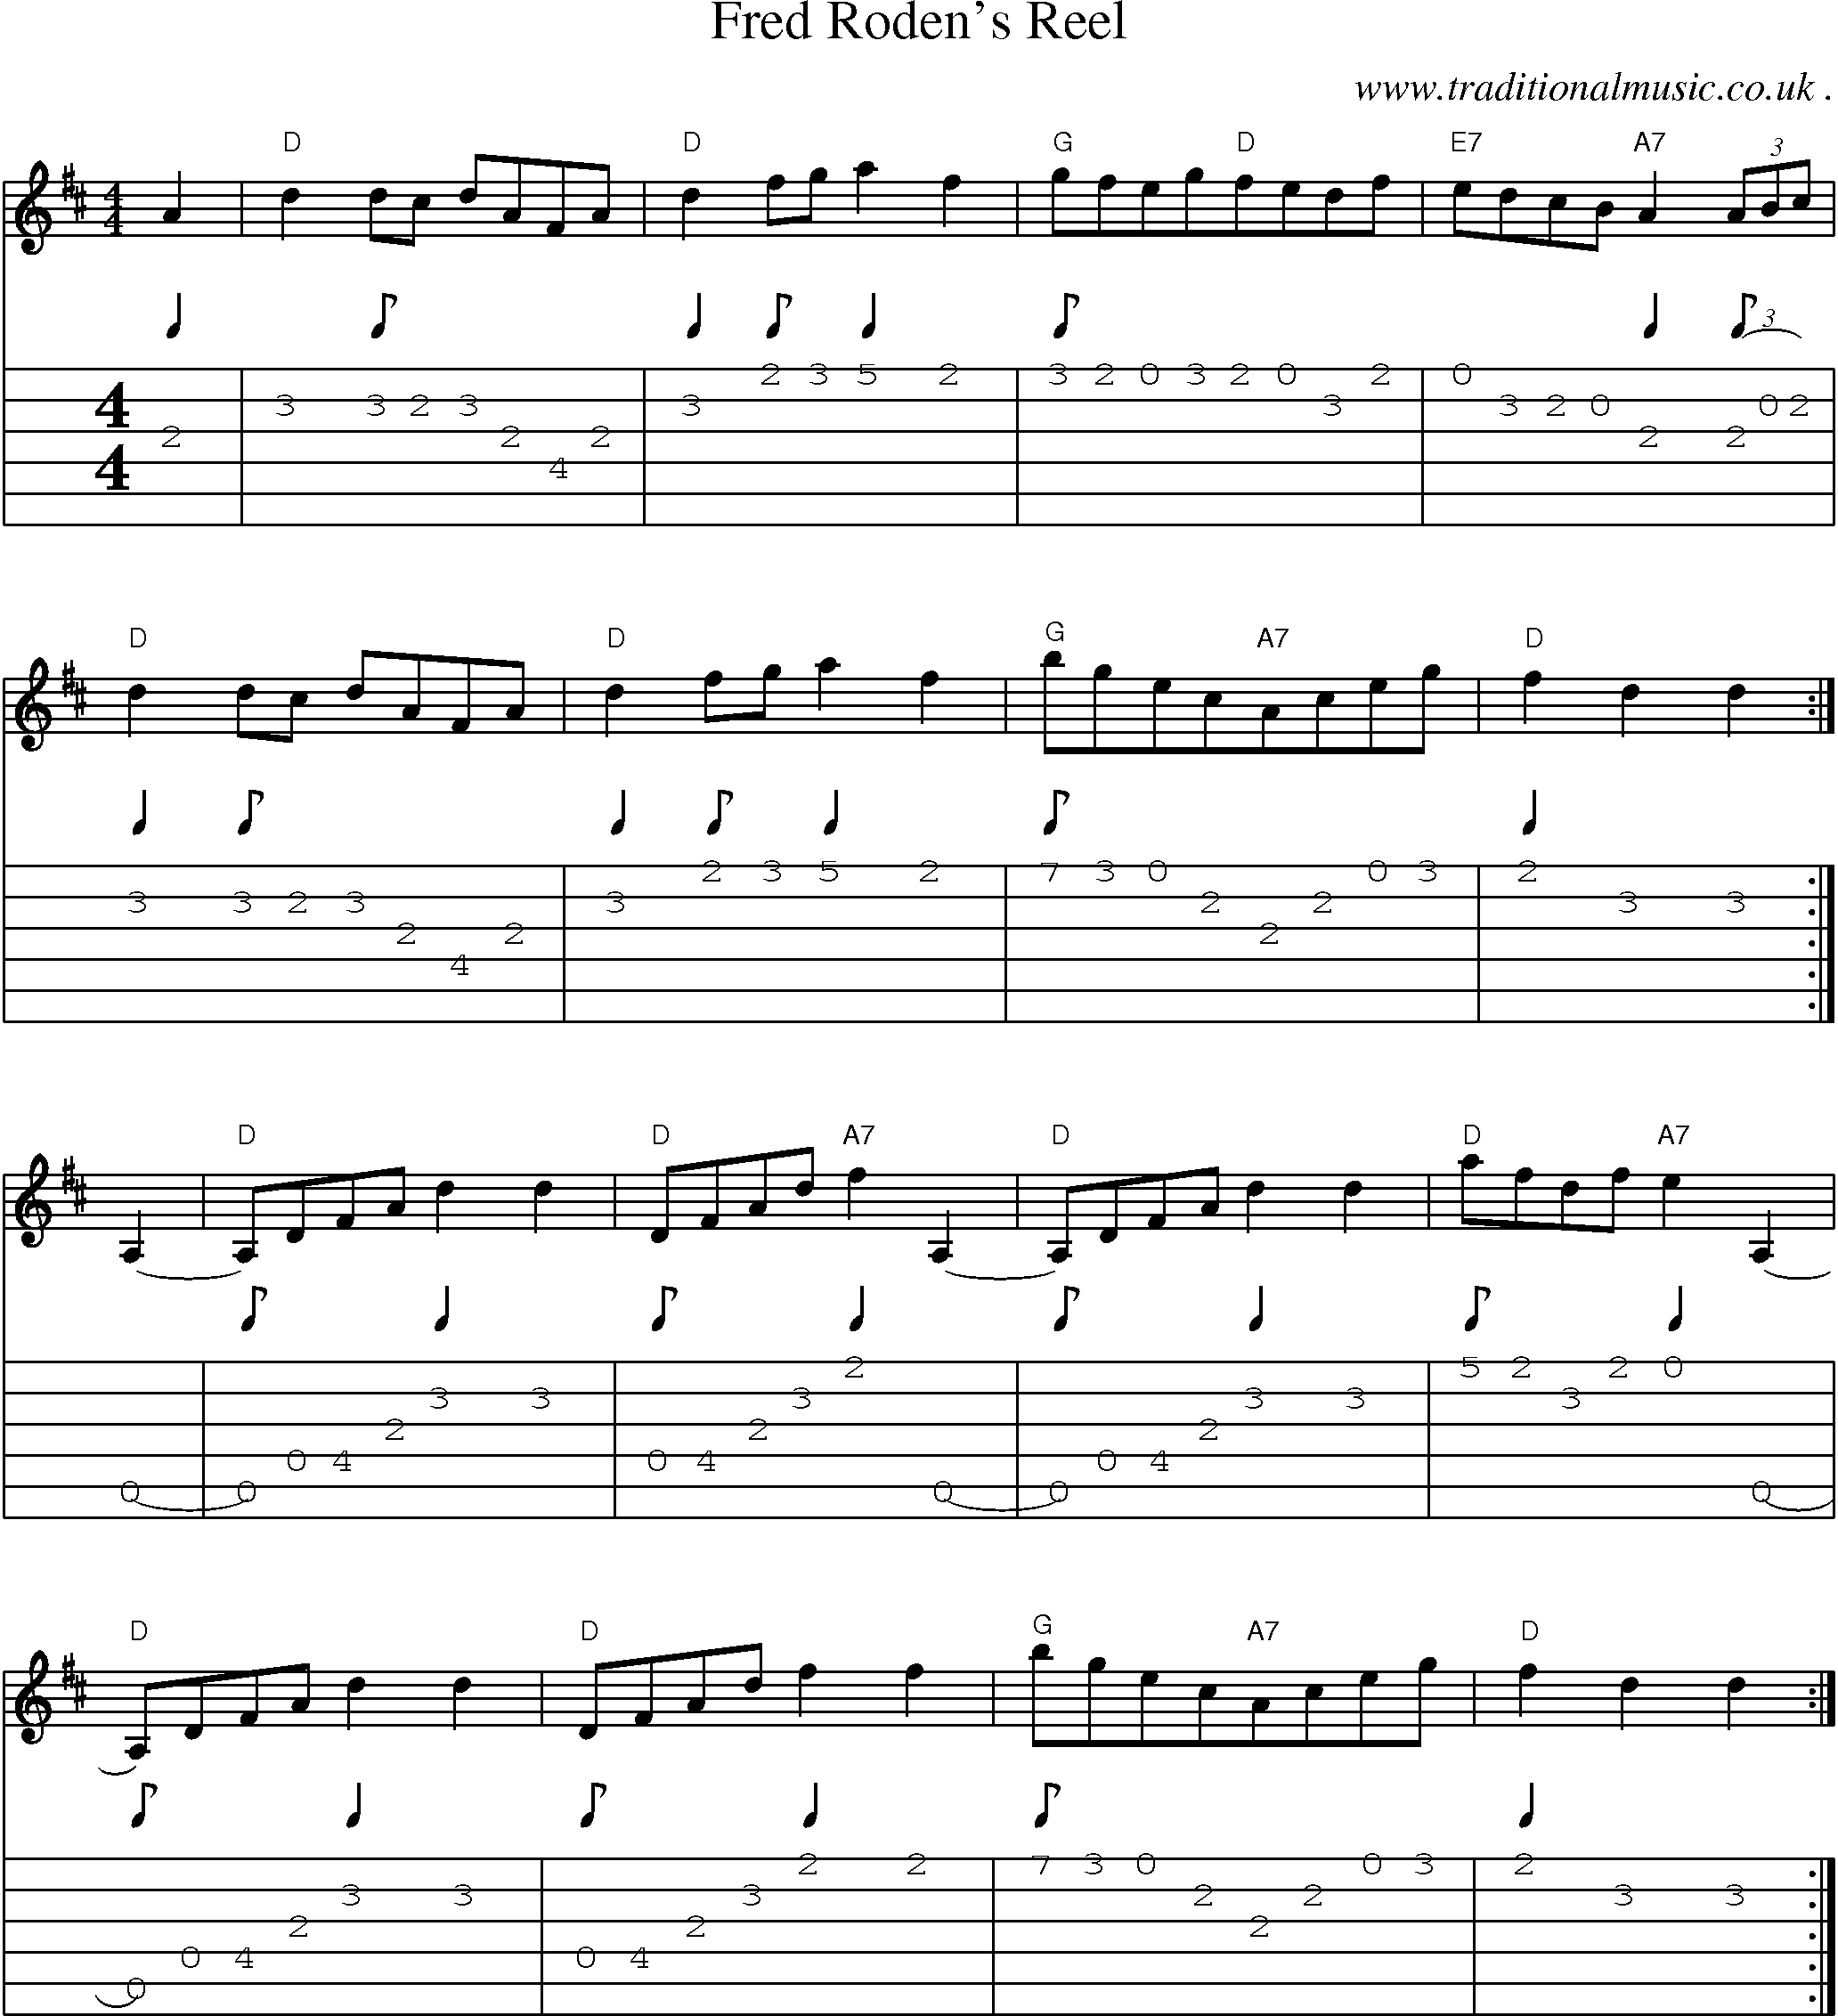 Sheet-Music and Guitar Tabs for Fred Rodens Reel